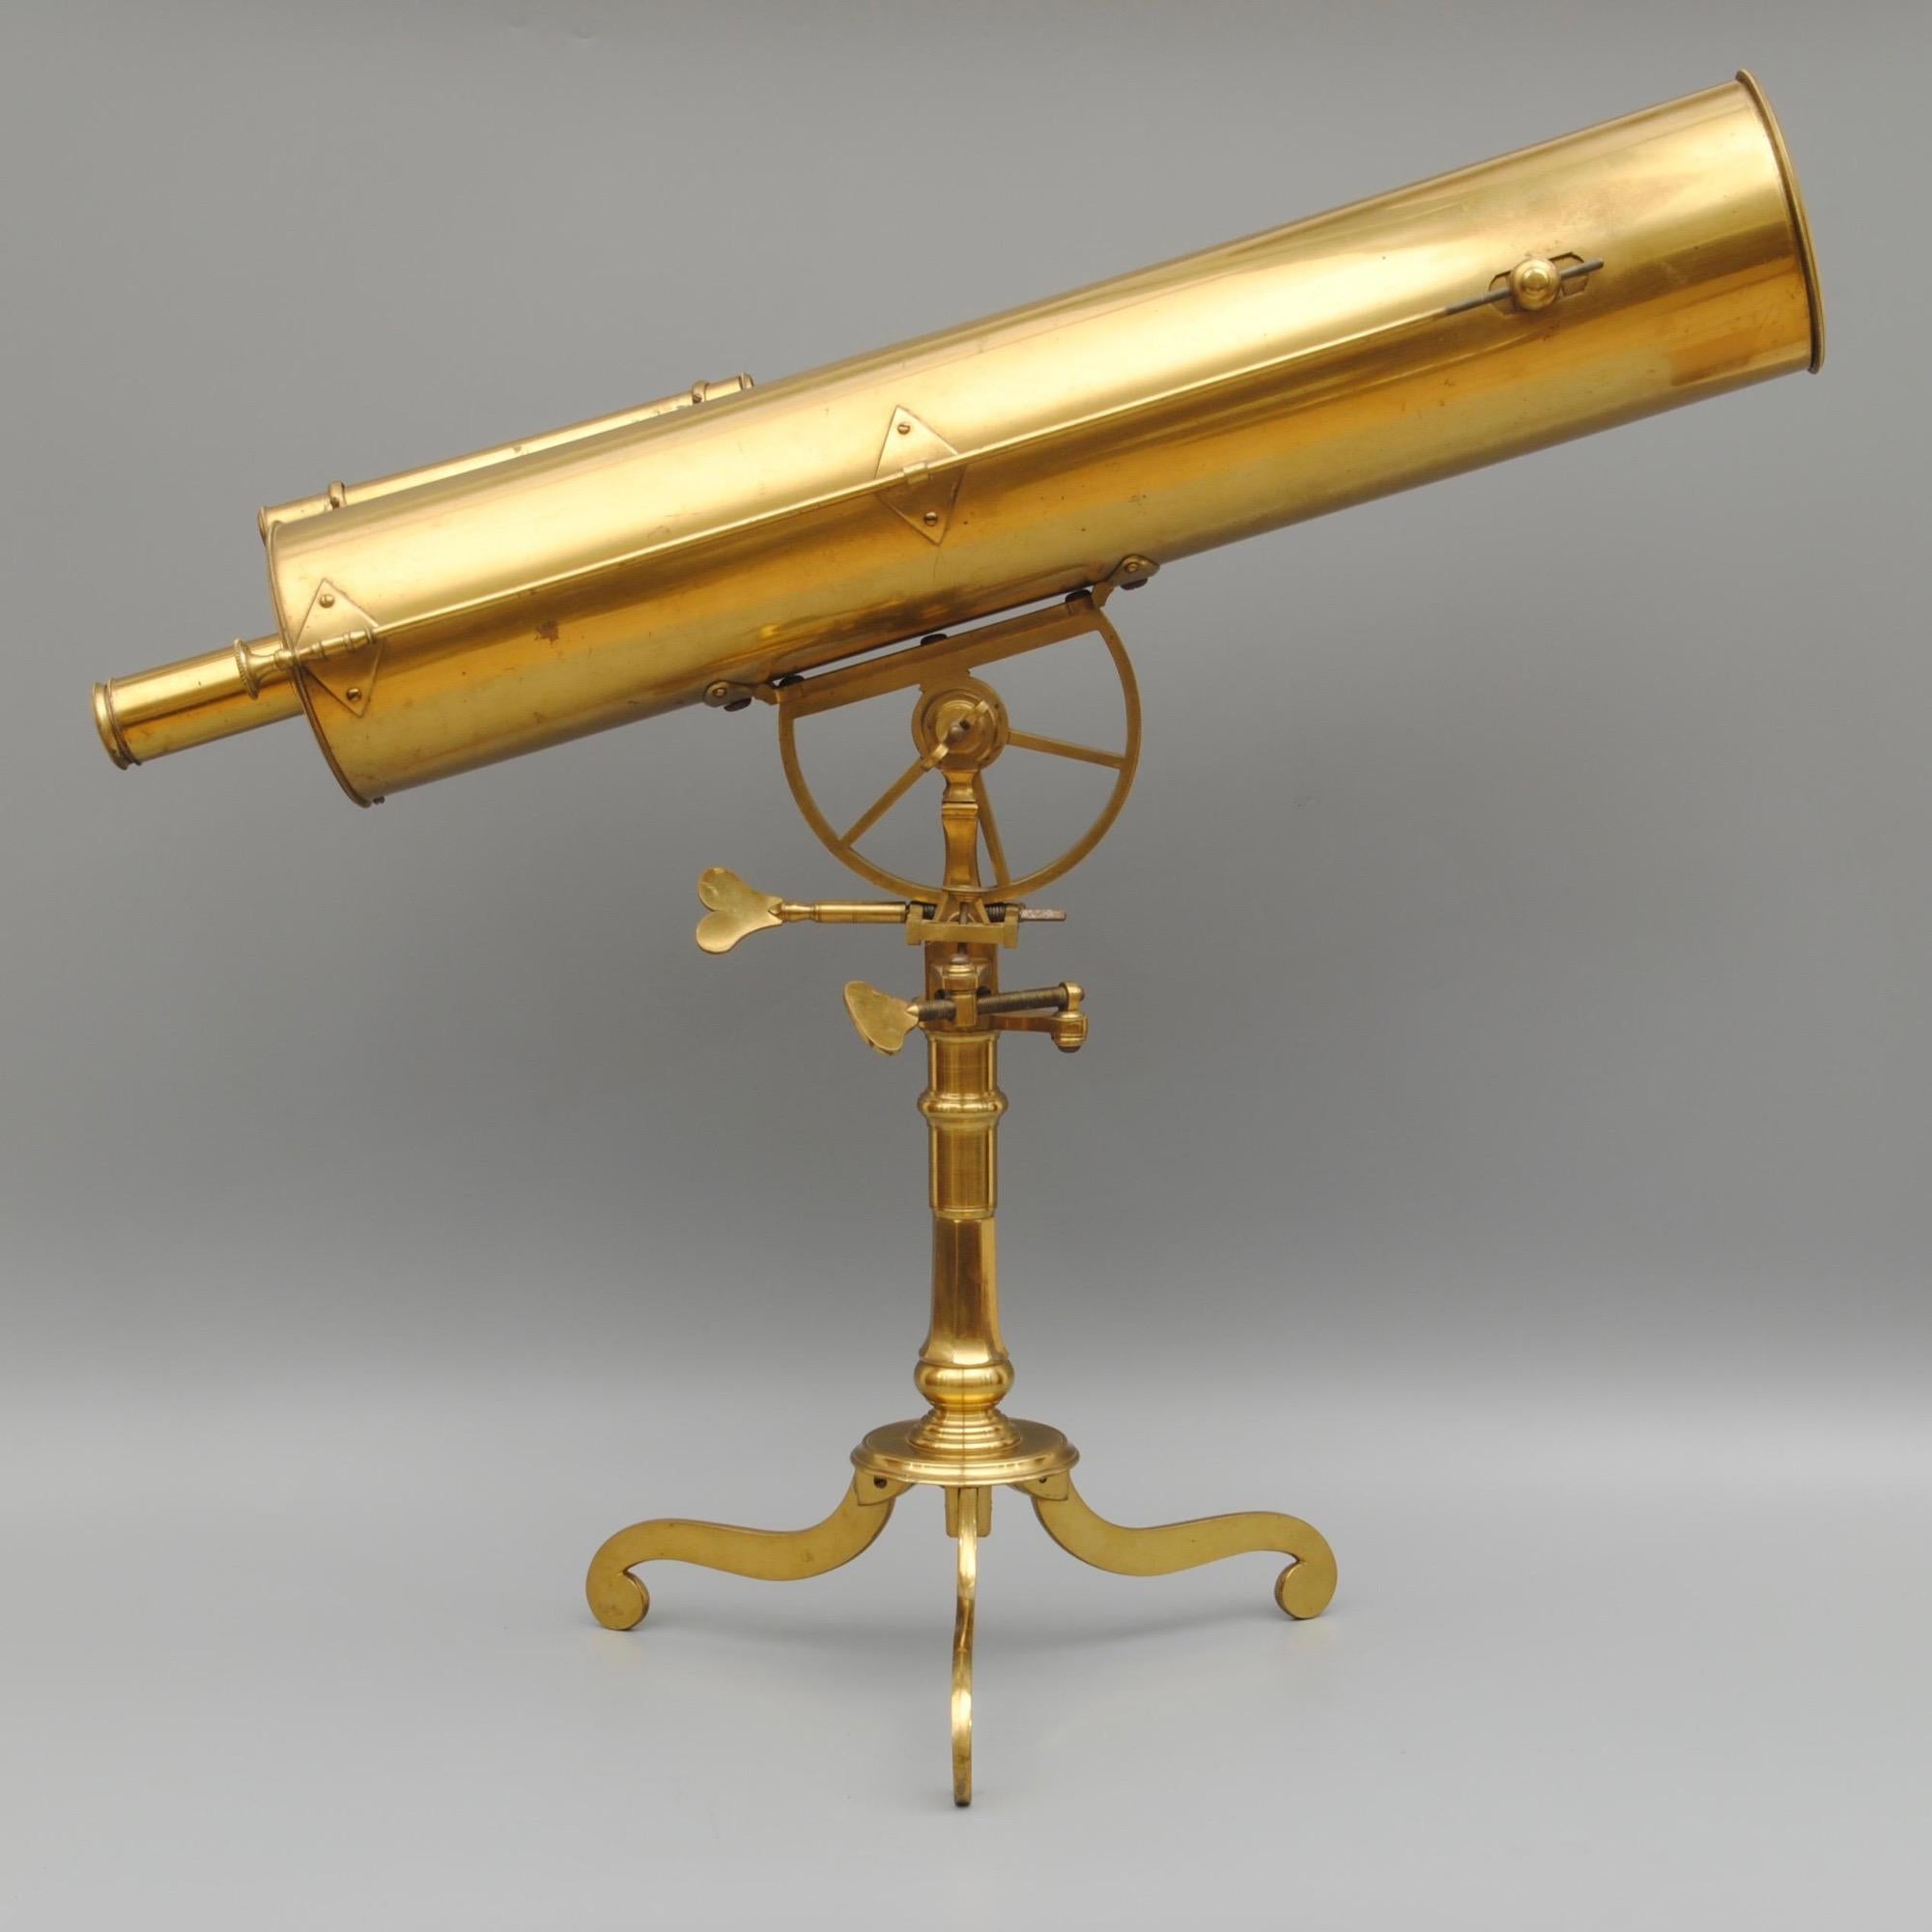 A wonderful example of an 18th century Gregorian reflecting telescope in its original mahogany carrying case. The condition of this fine instrument is superb with the original lacquer
Measure: overall length 72 cm
The partnership of Watkins and